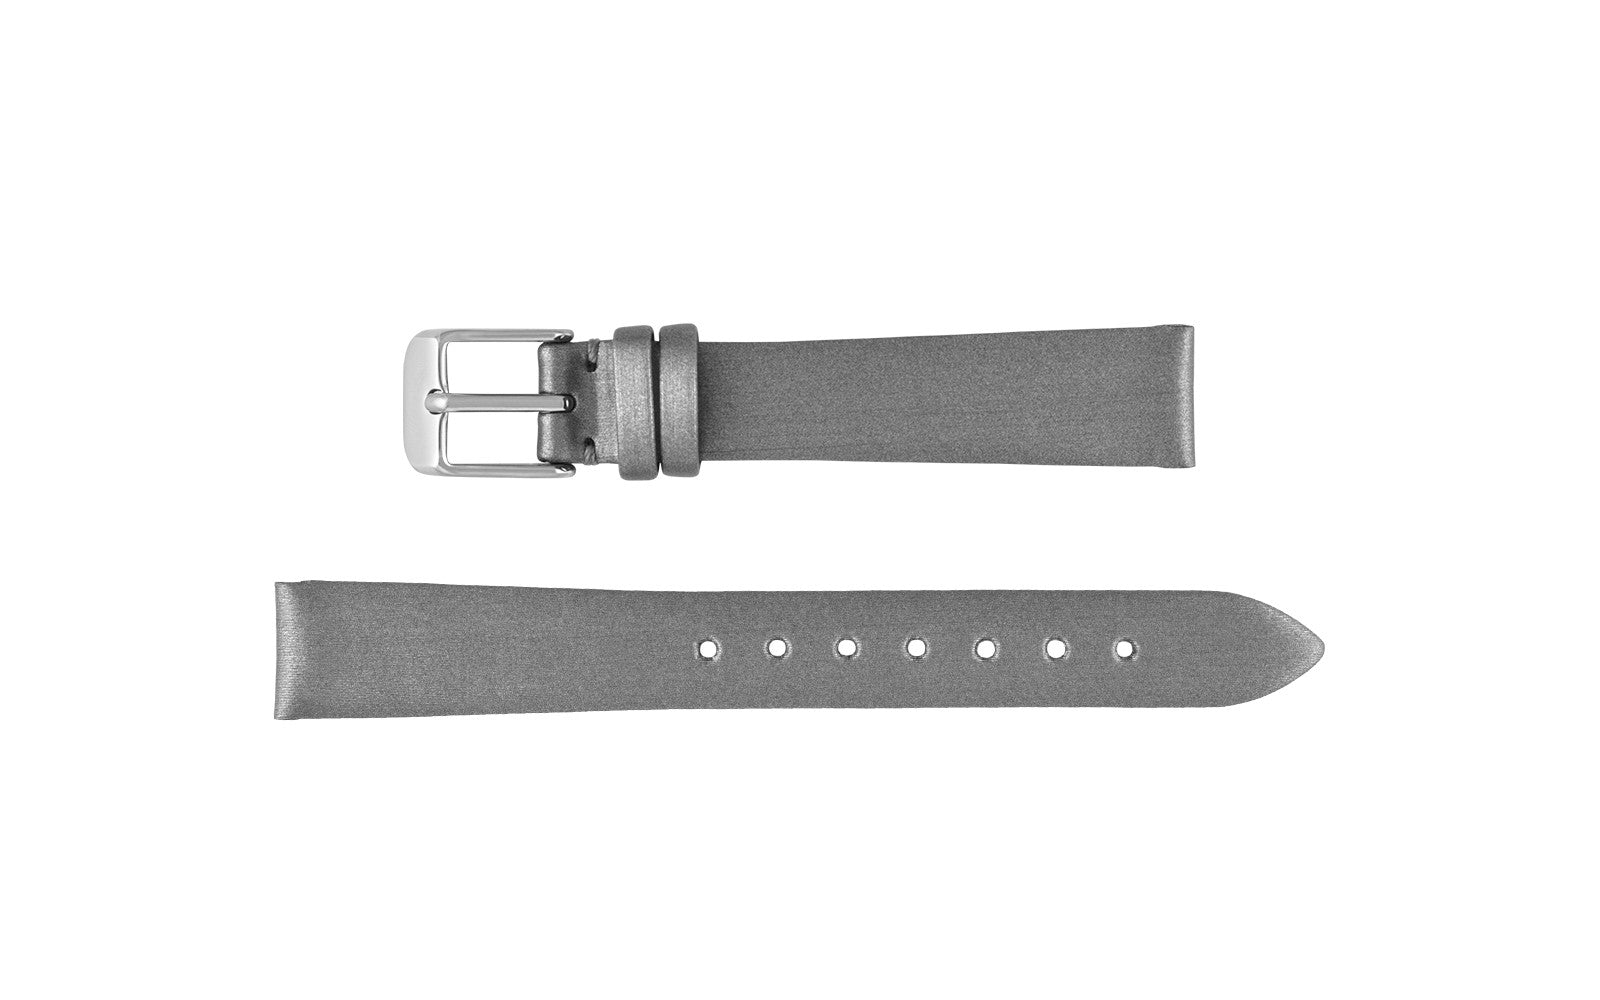 Watch Bands and Replacement Watch Straps